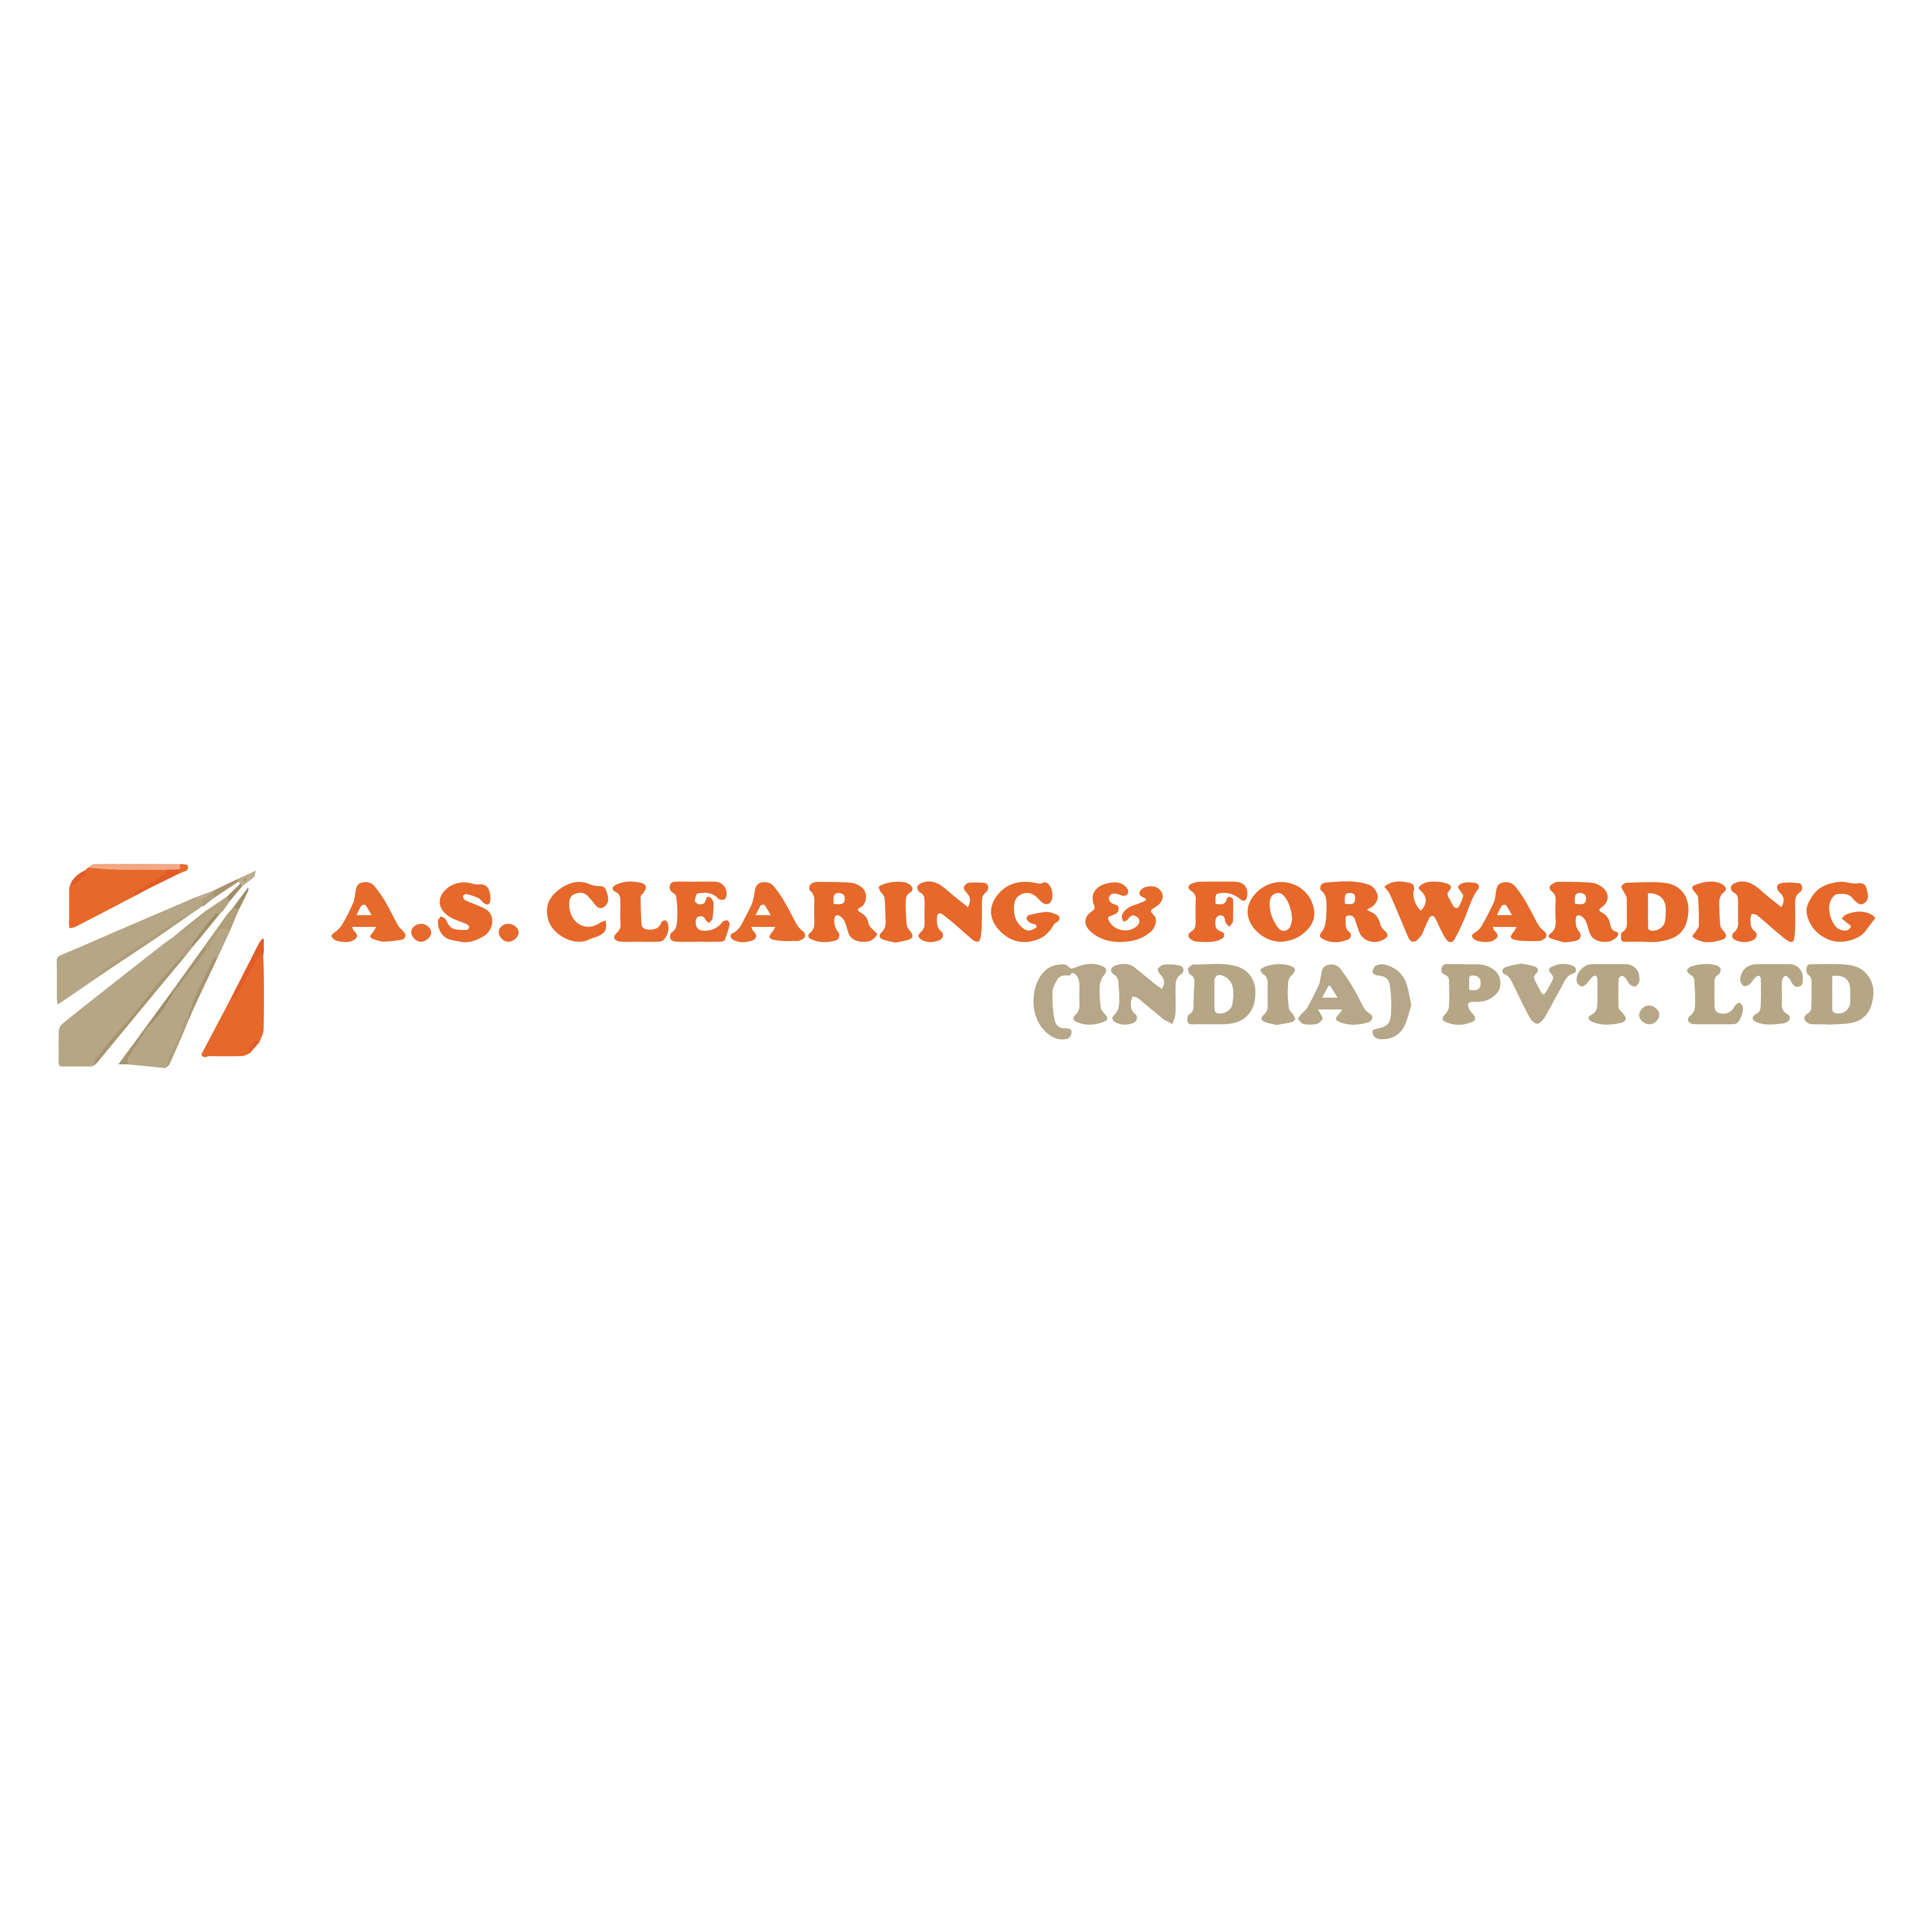 A. S. CLEARING & FORWARDING INDIA PVT. LTD.